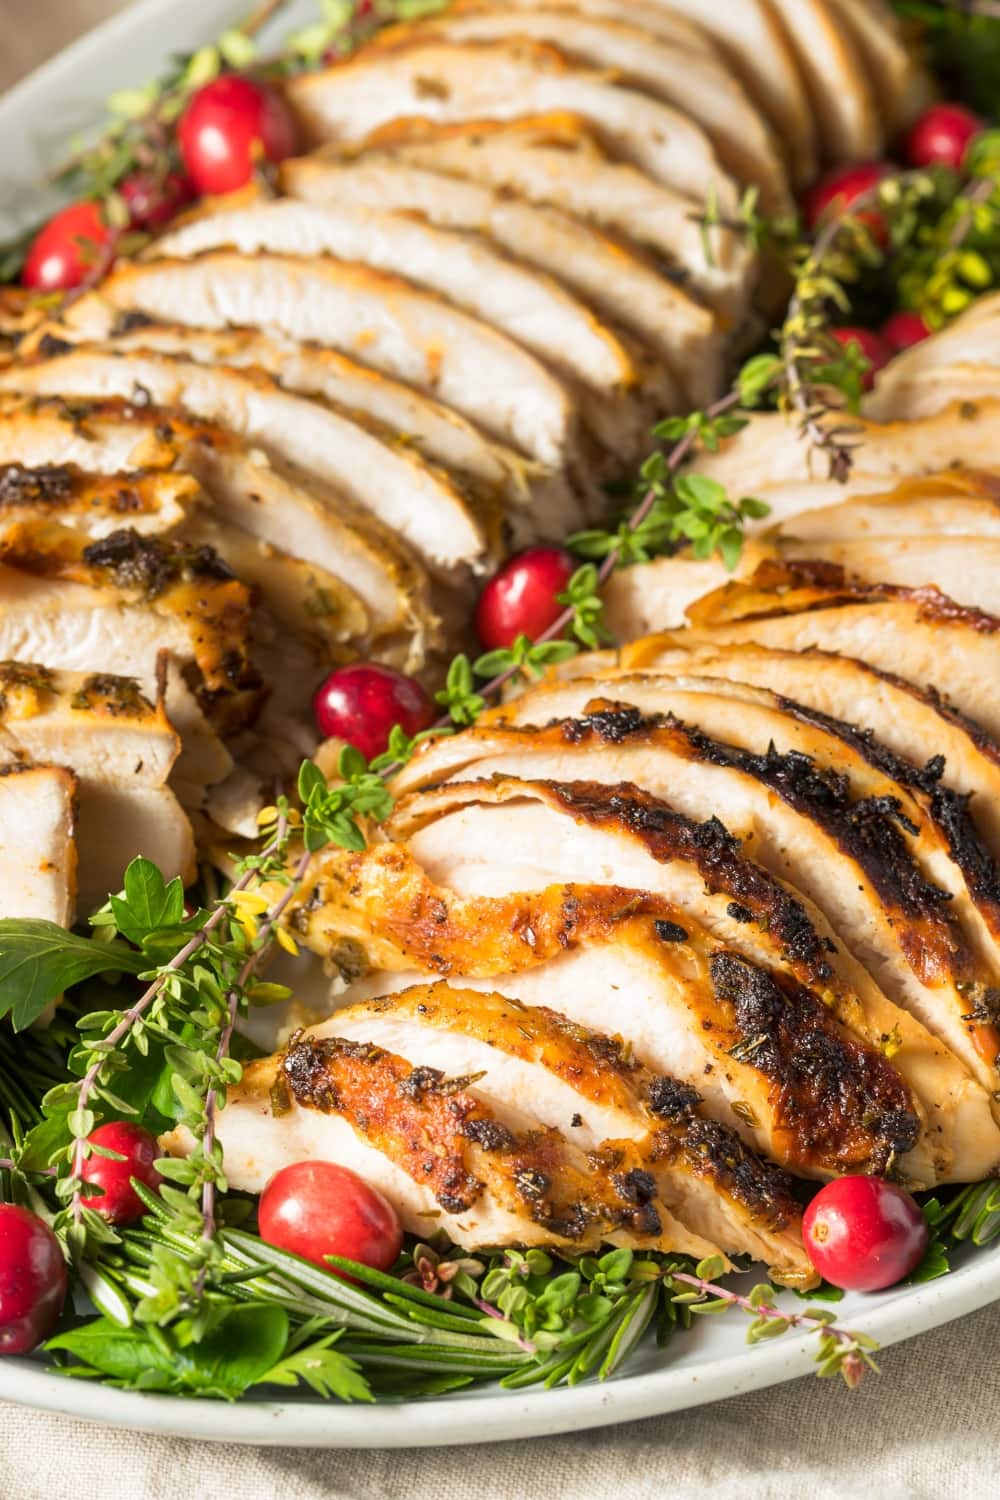 Sliced turkey breast with cranberries and herbs served on a white huge plate.